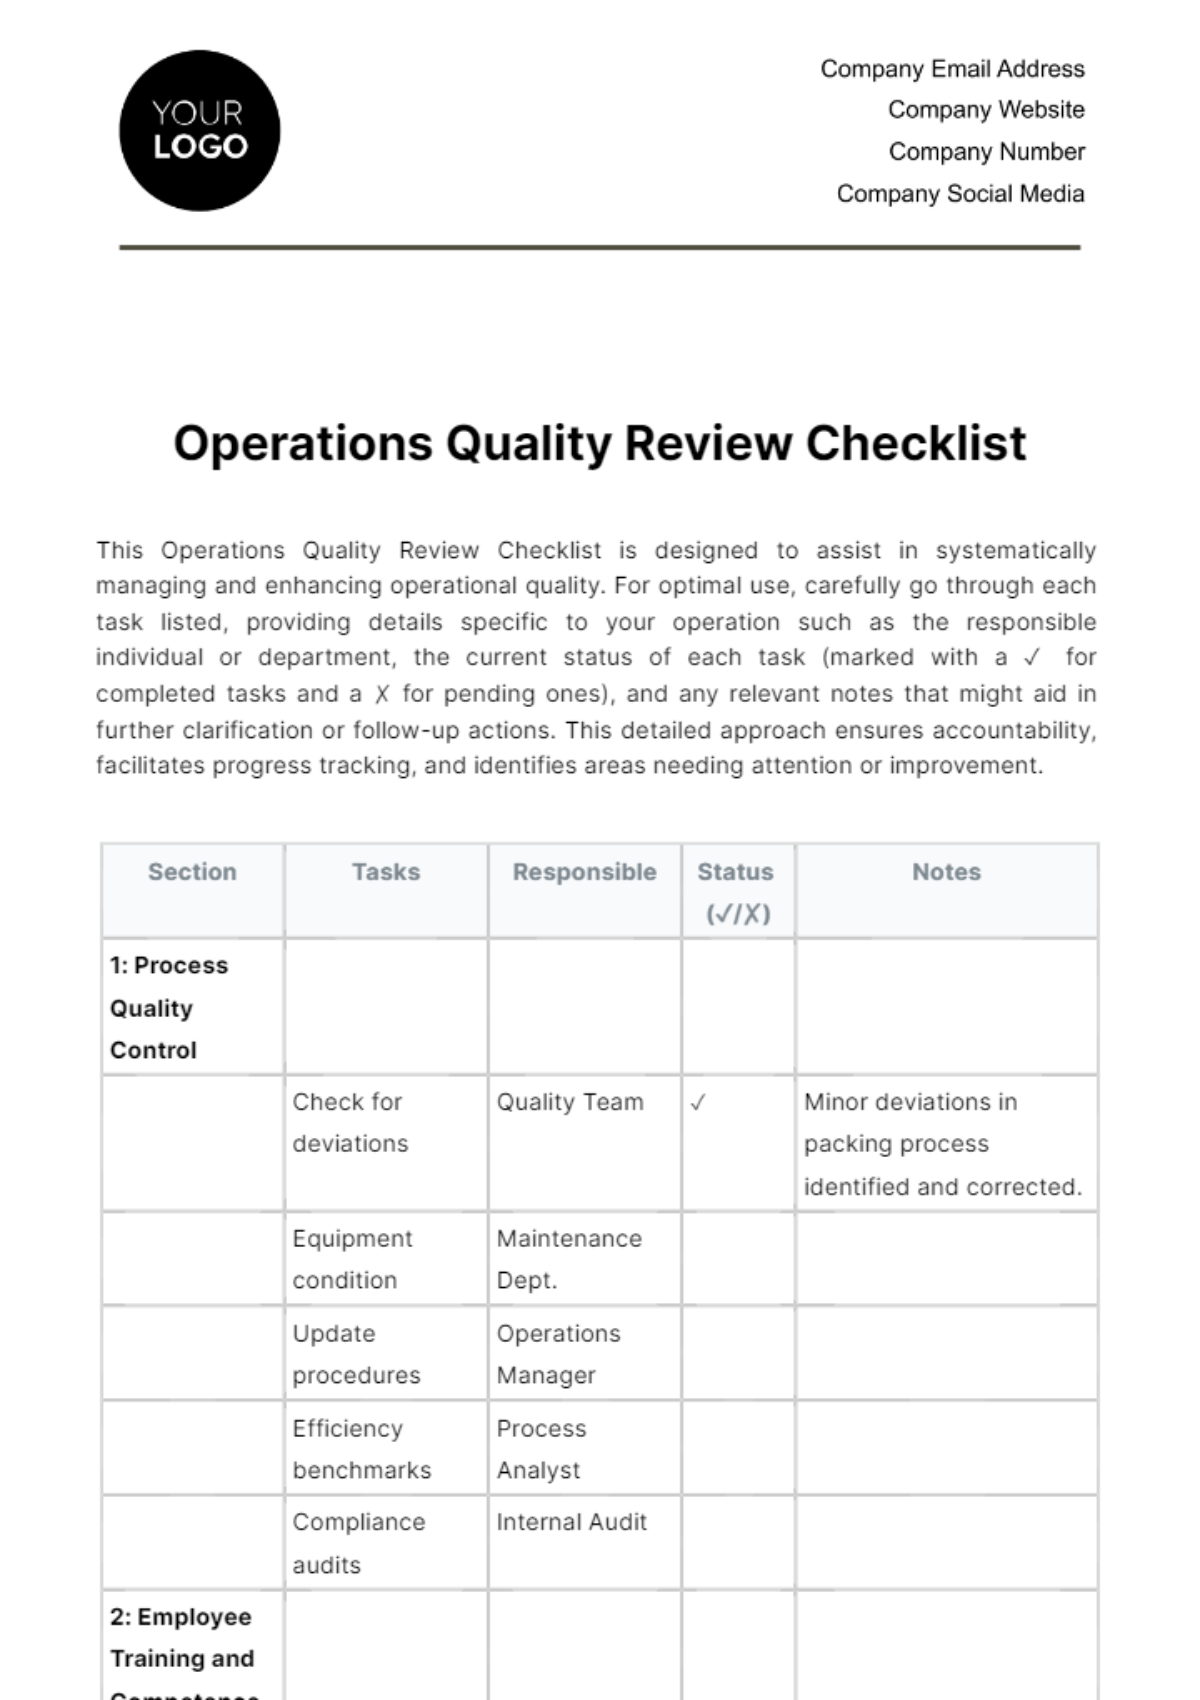 Free Operations Quality Review Checklist Template